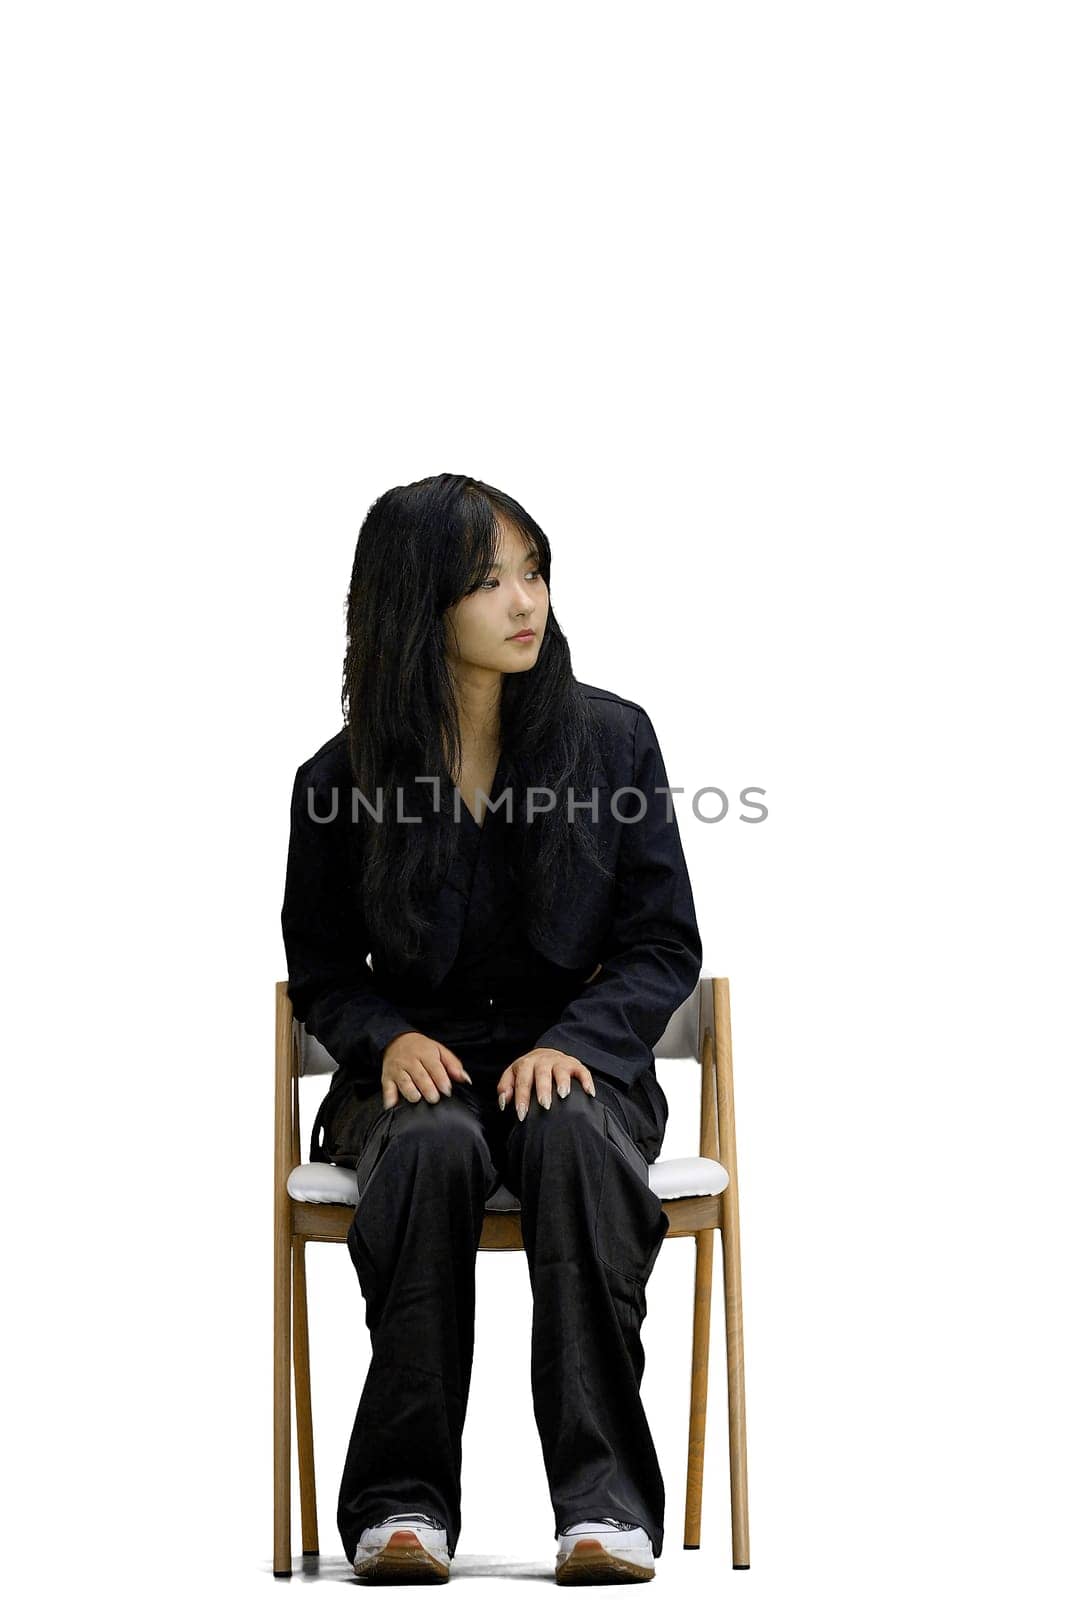 A woman in black clothes, on a white background, is sitting on a chair.